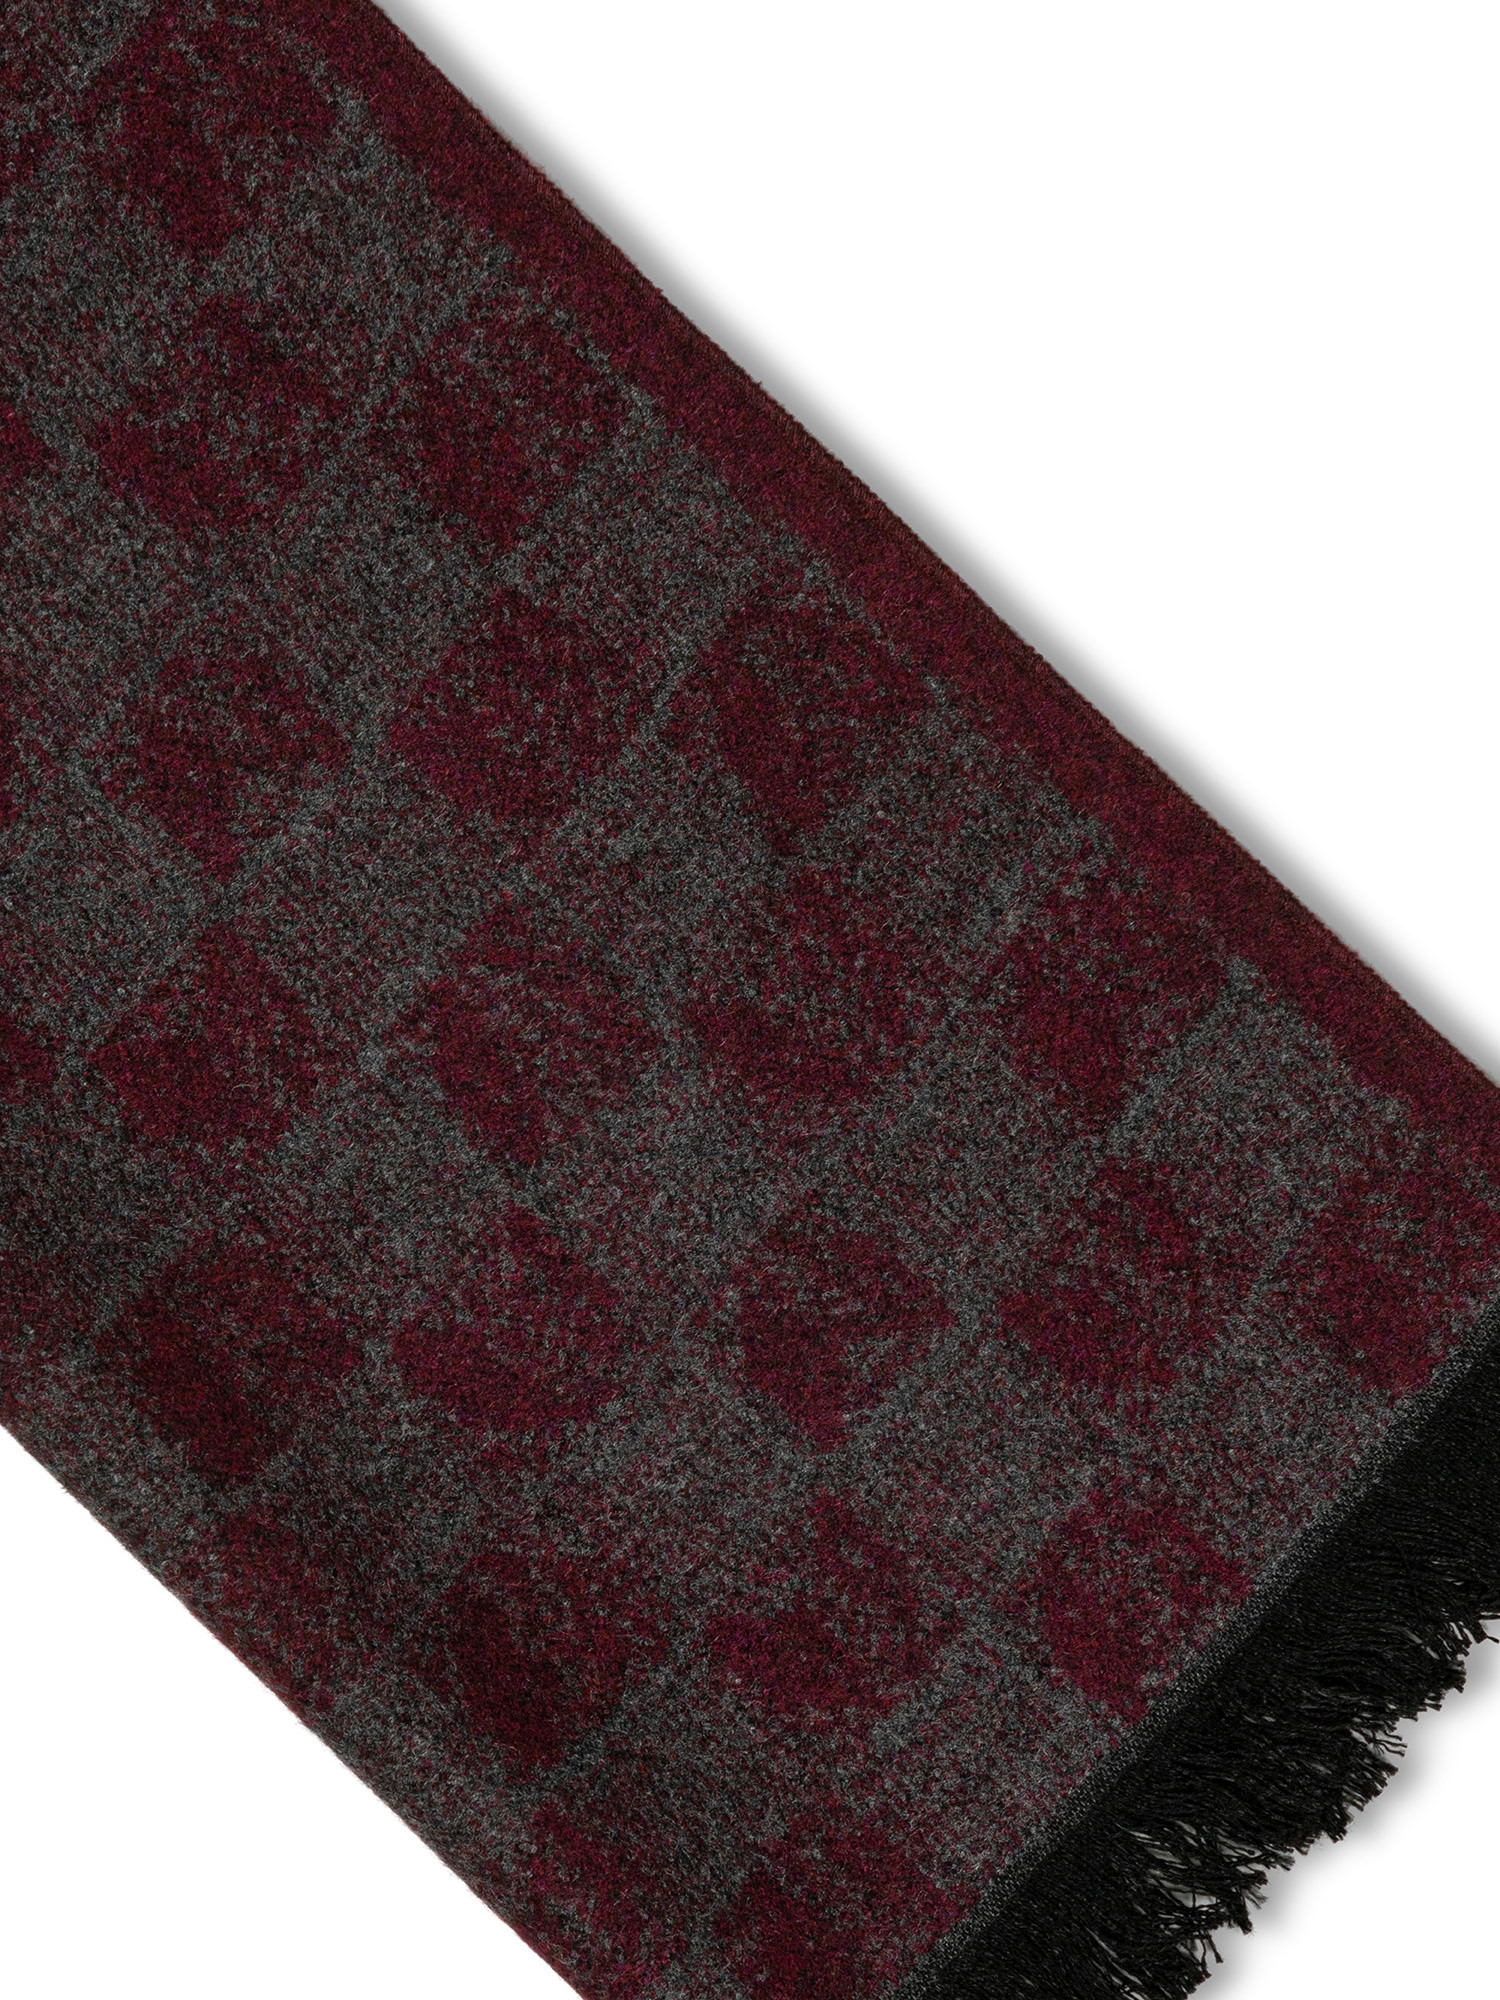 Luca D'Altieri - Checkerboard scarf, Dark Red, large image number 1